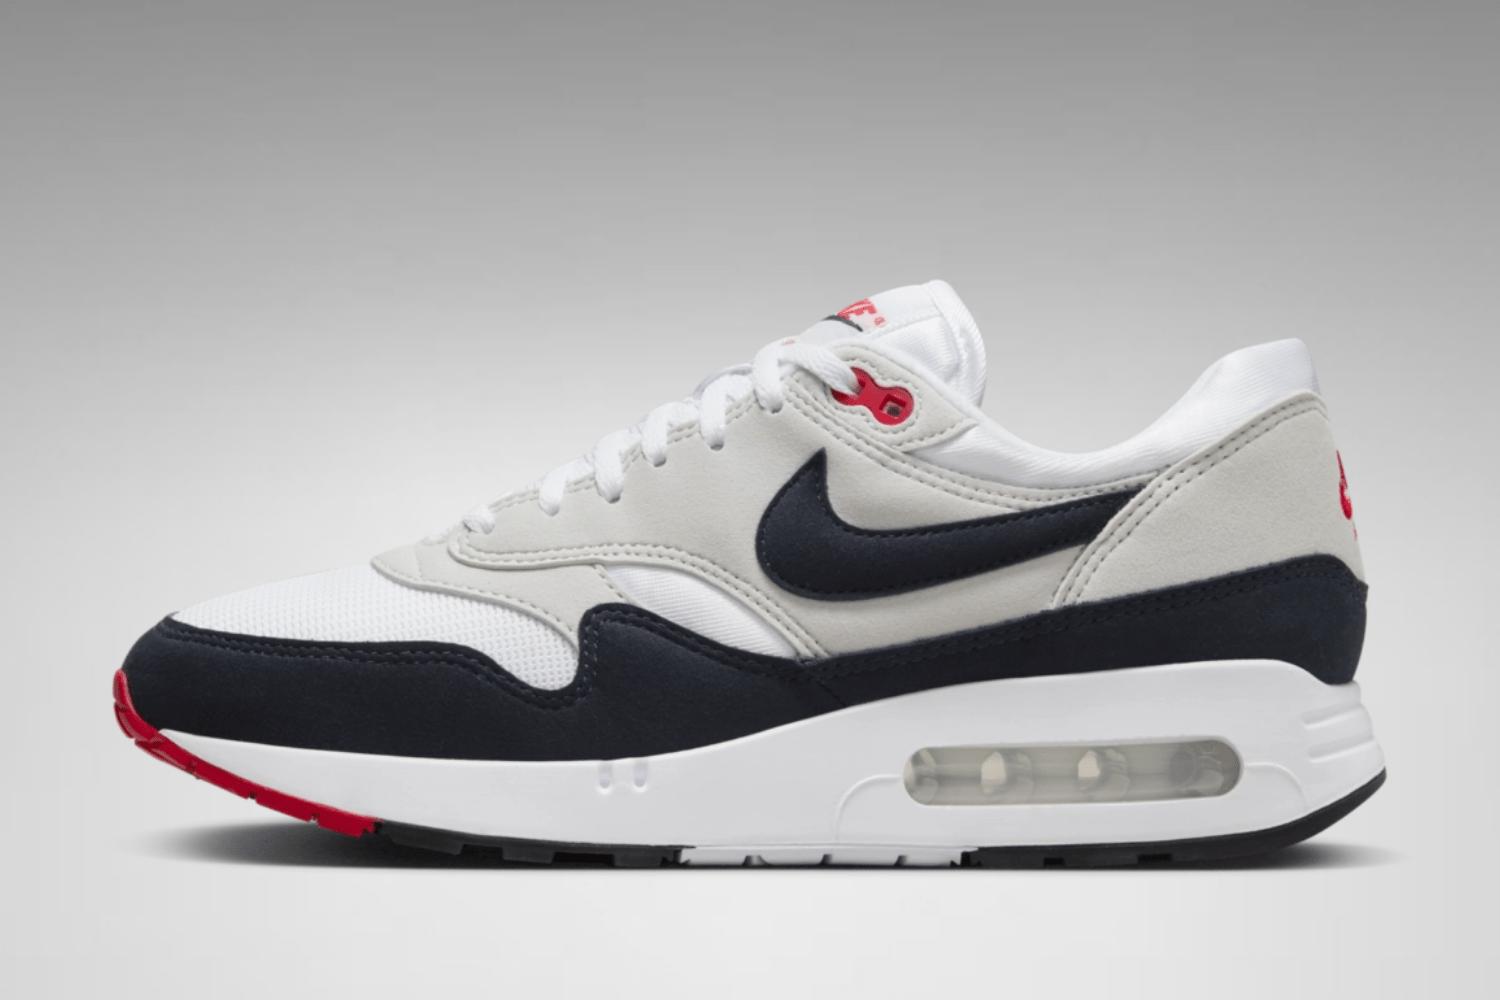 Check out the official images of the Nike Air Max 1 '86 OG 'USA'